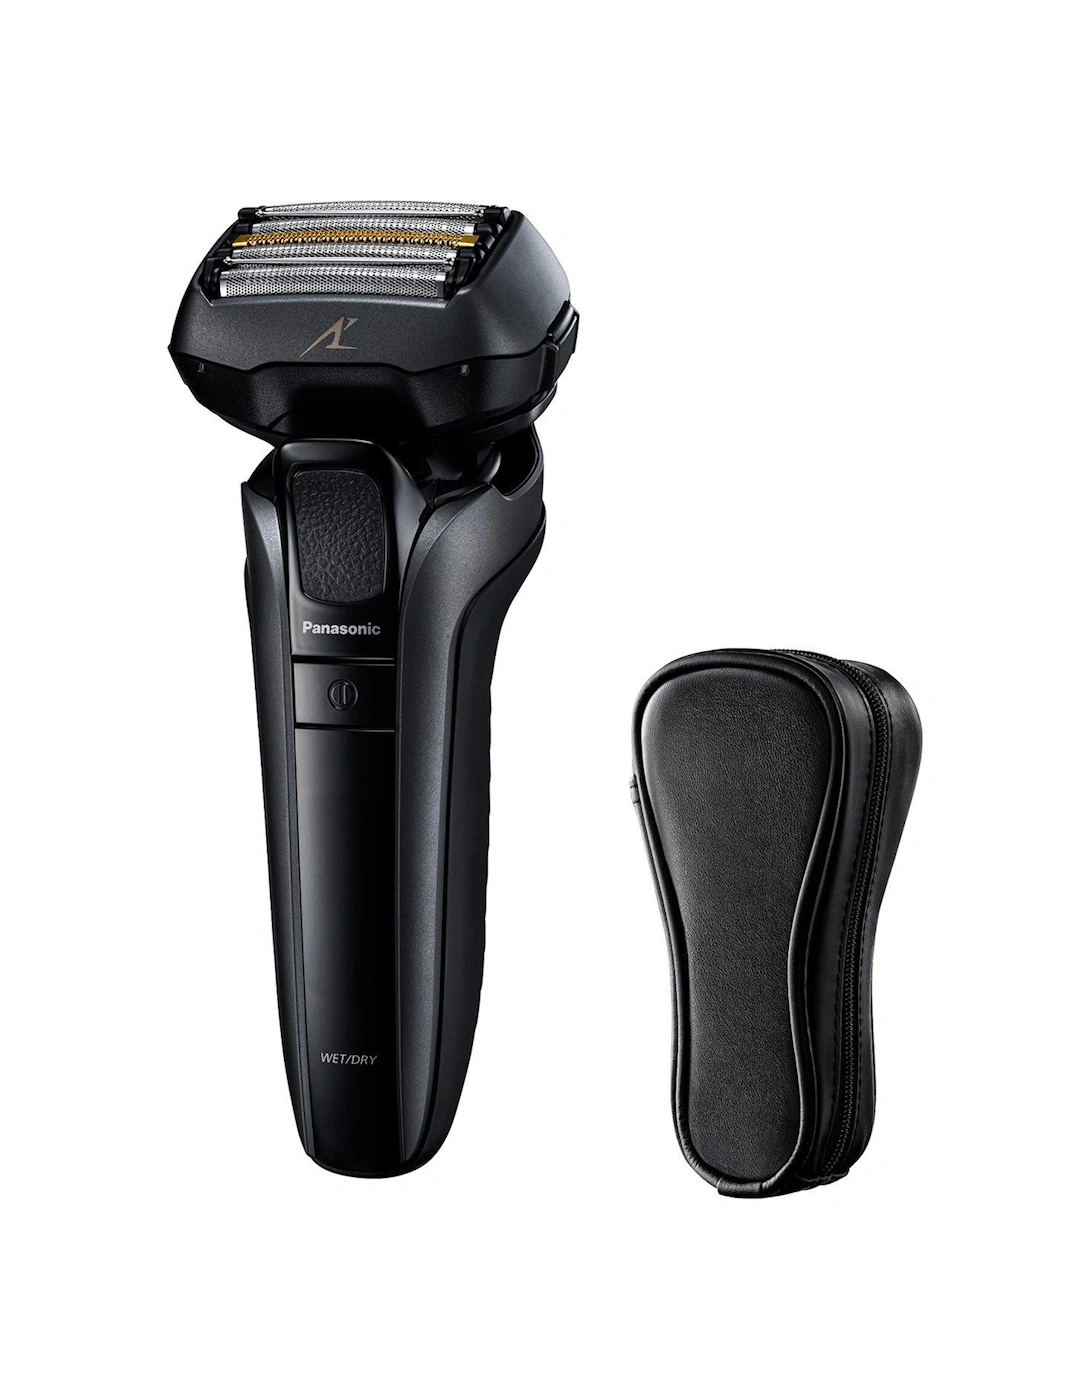 ES-LV6U Wet & Dry 5-Blade Electric Shaver for Men with Precise Clean Shaving, 2 of 1